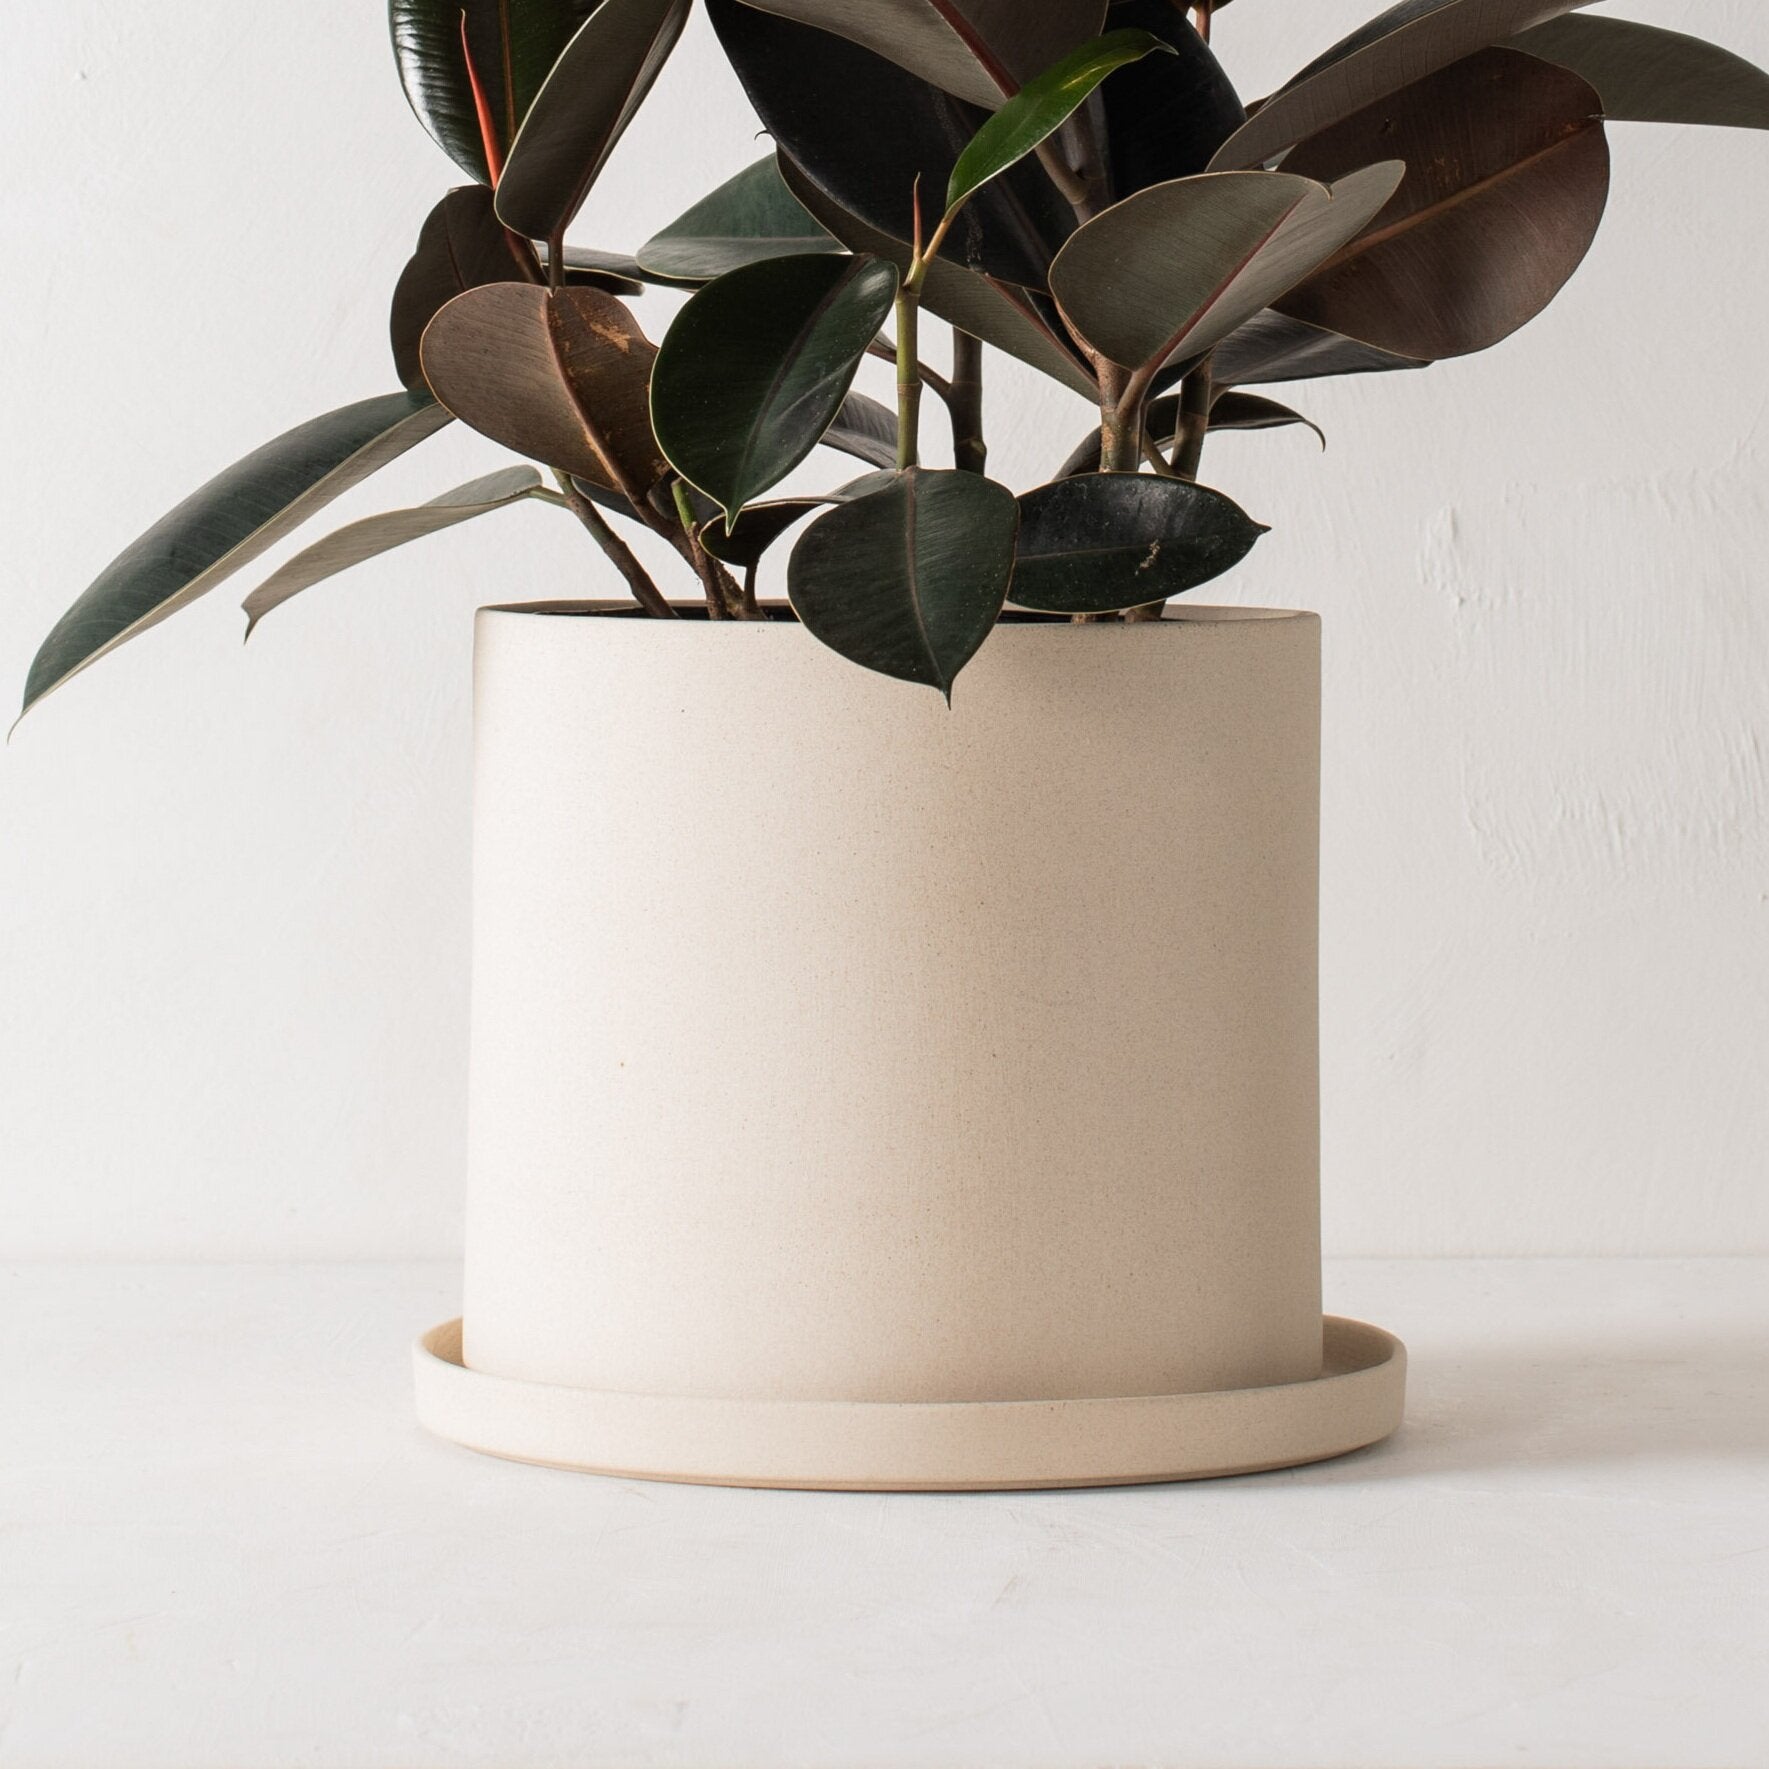 Stoneware 10 inch ceramic planter with bottom drainage dish. Staged on a white plaster textured tabletop against a plaster textured white wall. Large tall burgundy rubber tree plant inside. Designed and sold by Convivial Production, Kansas City Ceramics.  Edit alt text